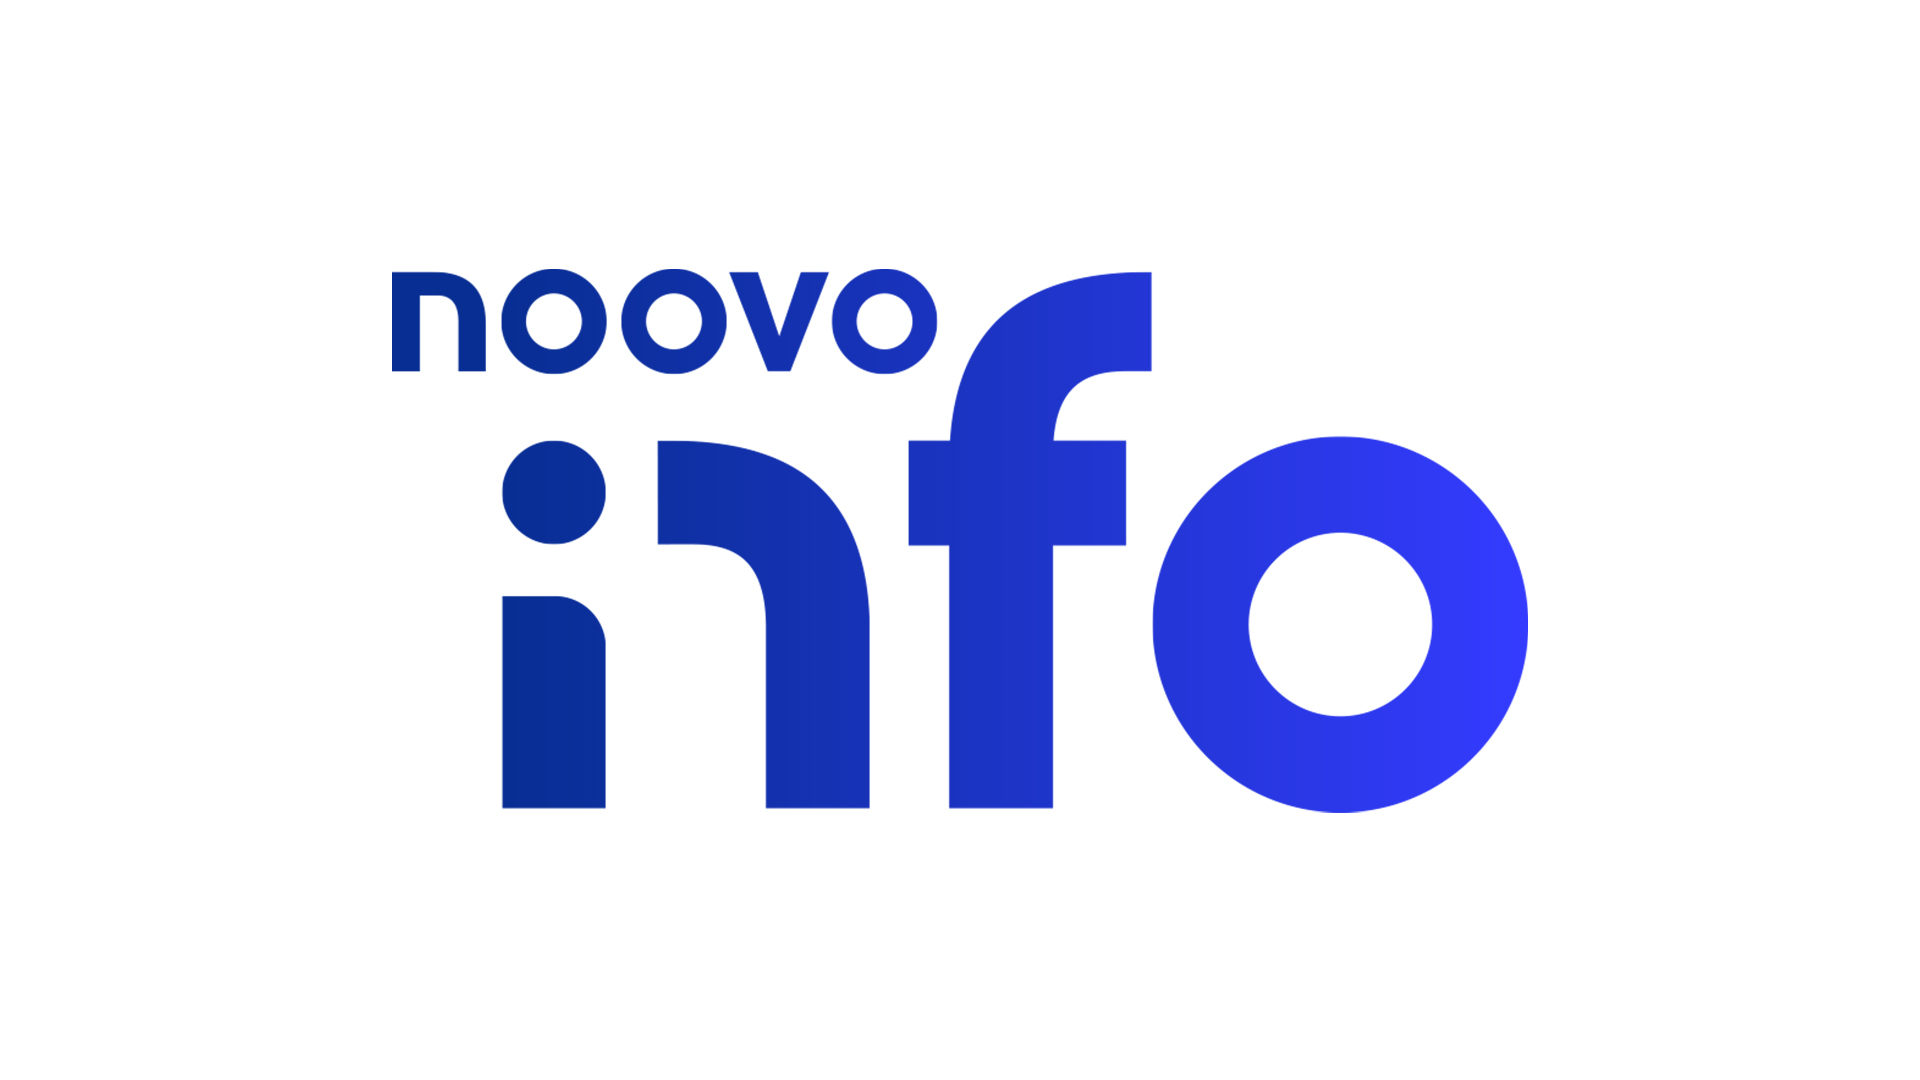 Noovo Info is competing for two RTDNA awards